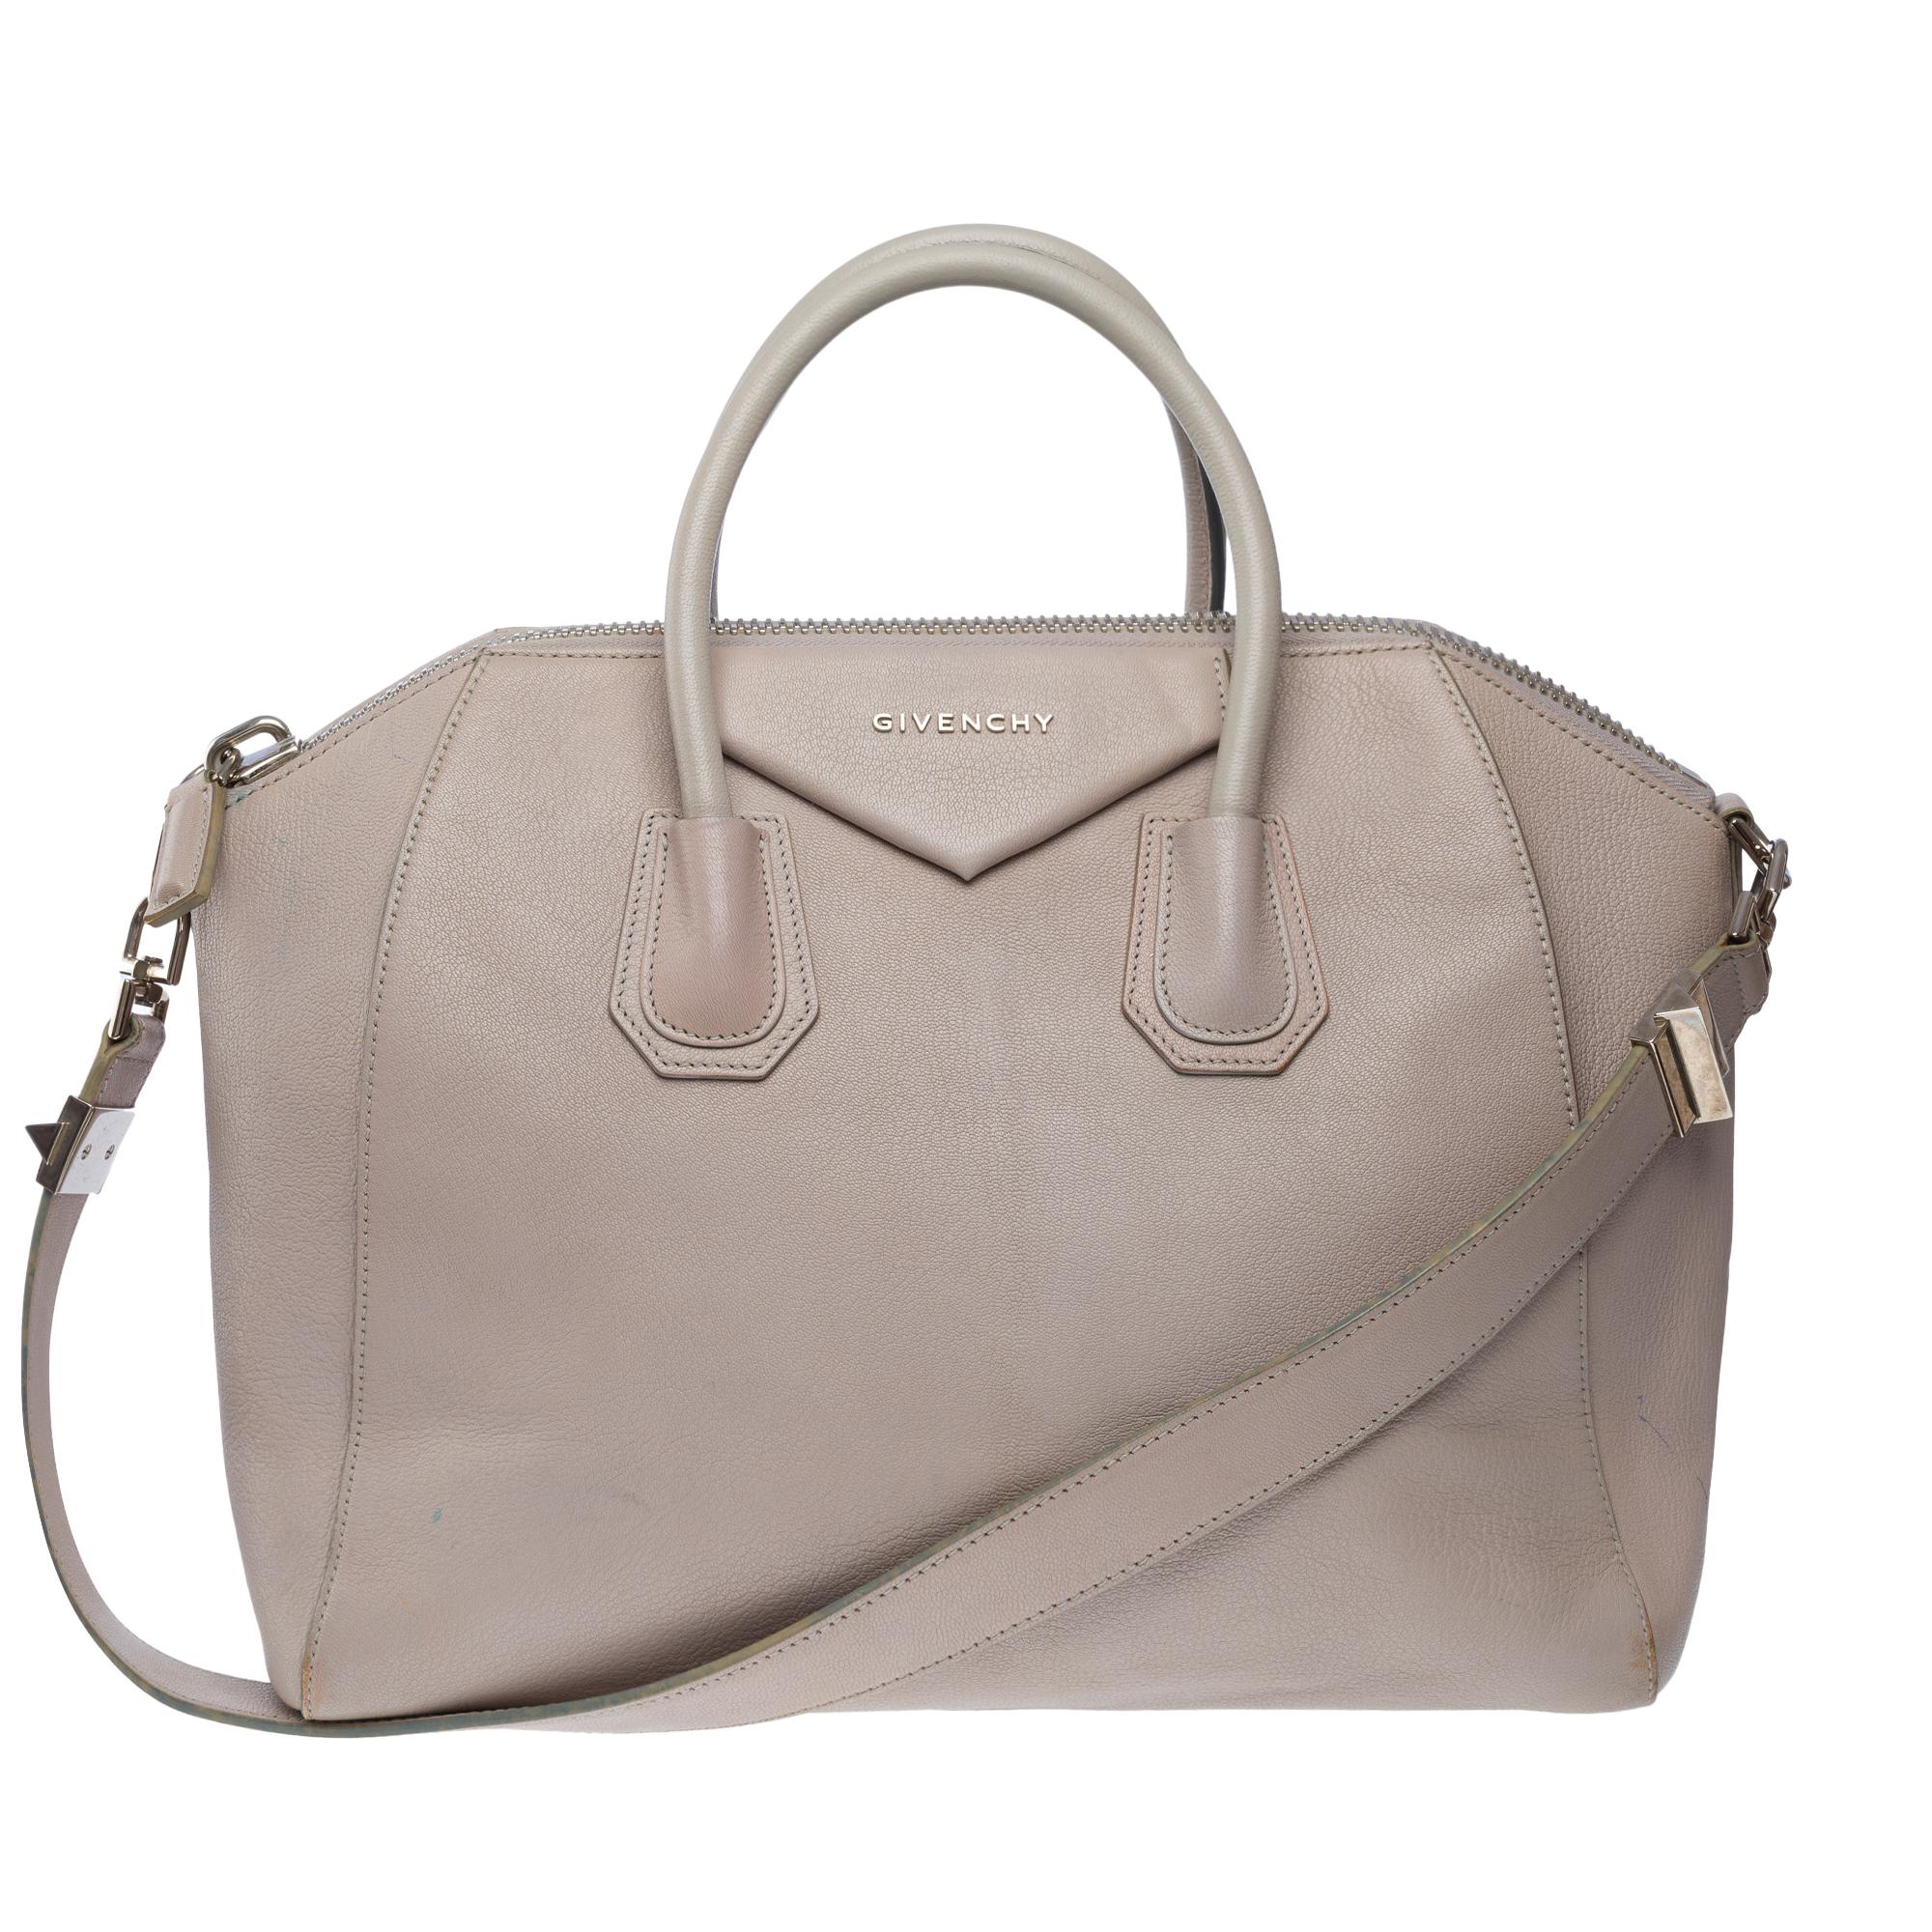 Pretty​ ​Givenchy​ ​Antigona​ ​handbag​ ​strap​ ​in​ ​grey​ ​grained​ ​leather,​ ​silver​ ​metal​ ​trim,​ ​double​ ​handle​ ​in​ ​grey​ ​leather,​ ​a​ ​removable​ ​handle​ ​in​ ​grey​ ​leather​ ​for​ ​carrying​ ​hand​ ​or​ ​shoulder​